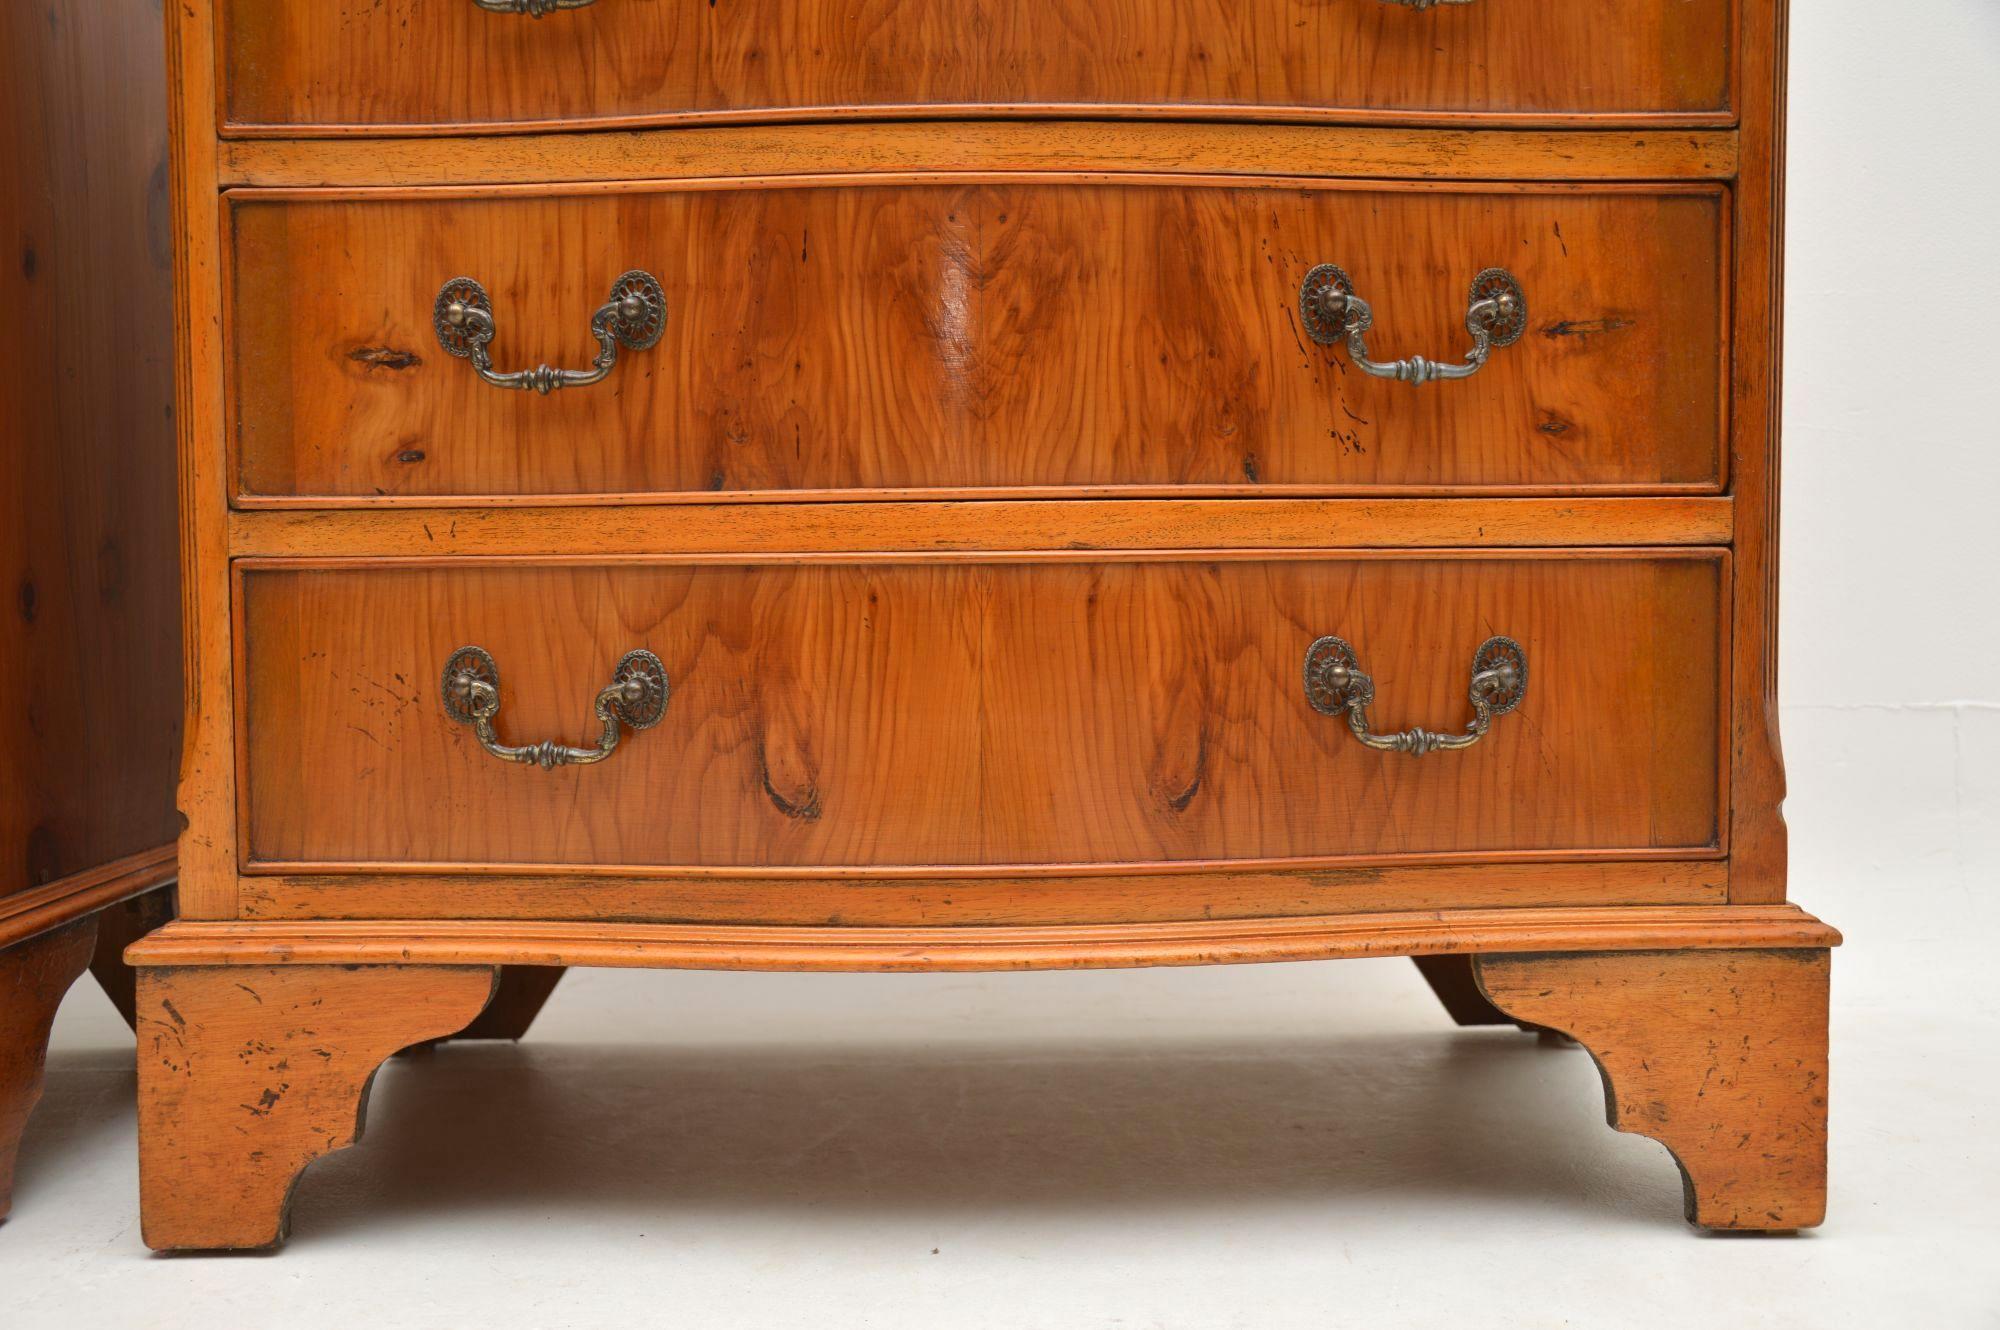 yew wood chest of drawers